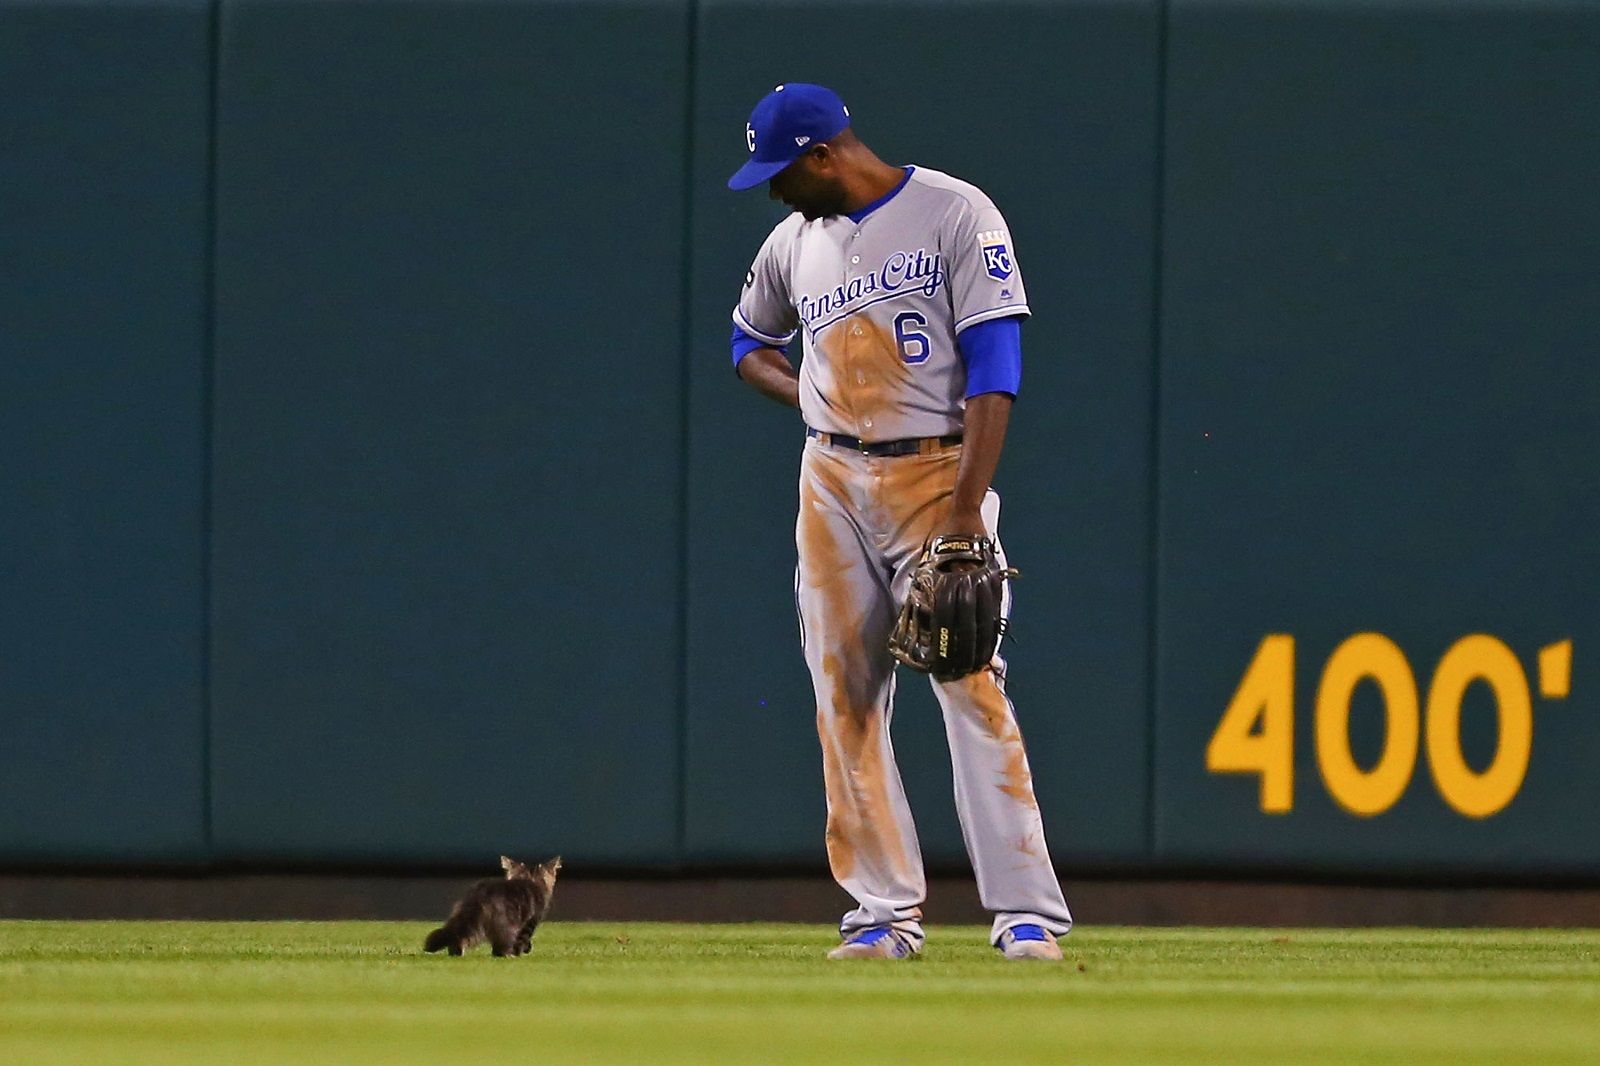 ST. LOUIS, MO - AUGUST 9: Lorenzo Cain #6 of the Kansas City Royals watches a kitten run across the outfield in the sixth inning during a game against the St. Louis Cardinals at Busch Stadium on August 9, 2017 in St. Louis, Missouri.  (Photo by Dilip Vishwanat/Getty Images)